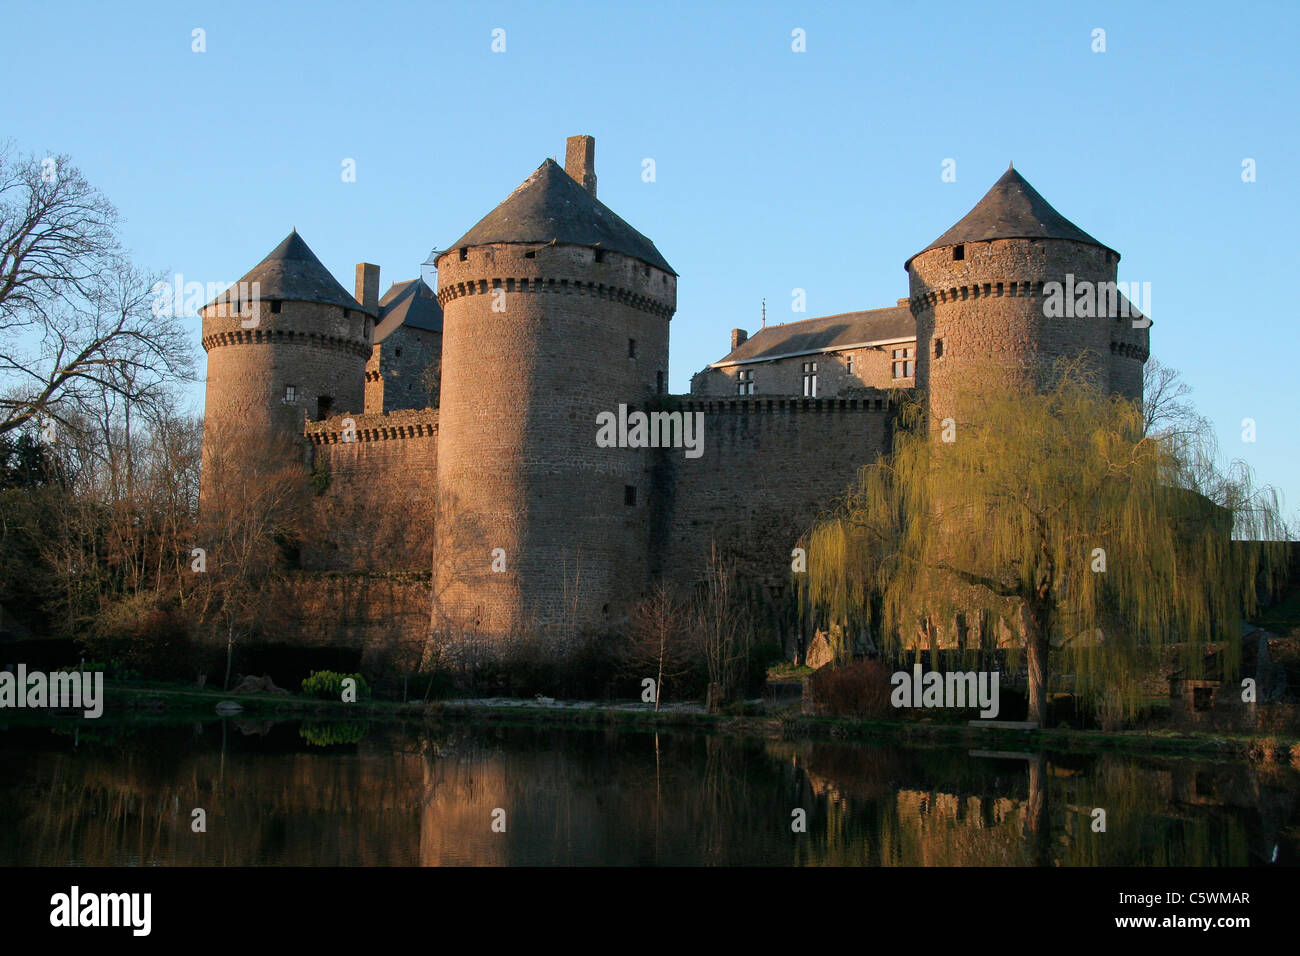 The Castle of Lassay (fifteenth century), located in the heart of the city of Lassay-les-Chateaux (Mayenne departement (France). Stock Photo